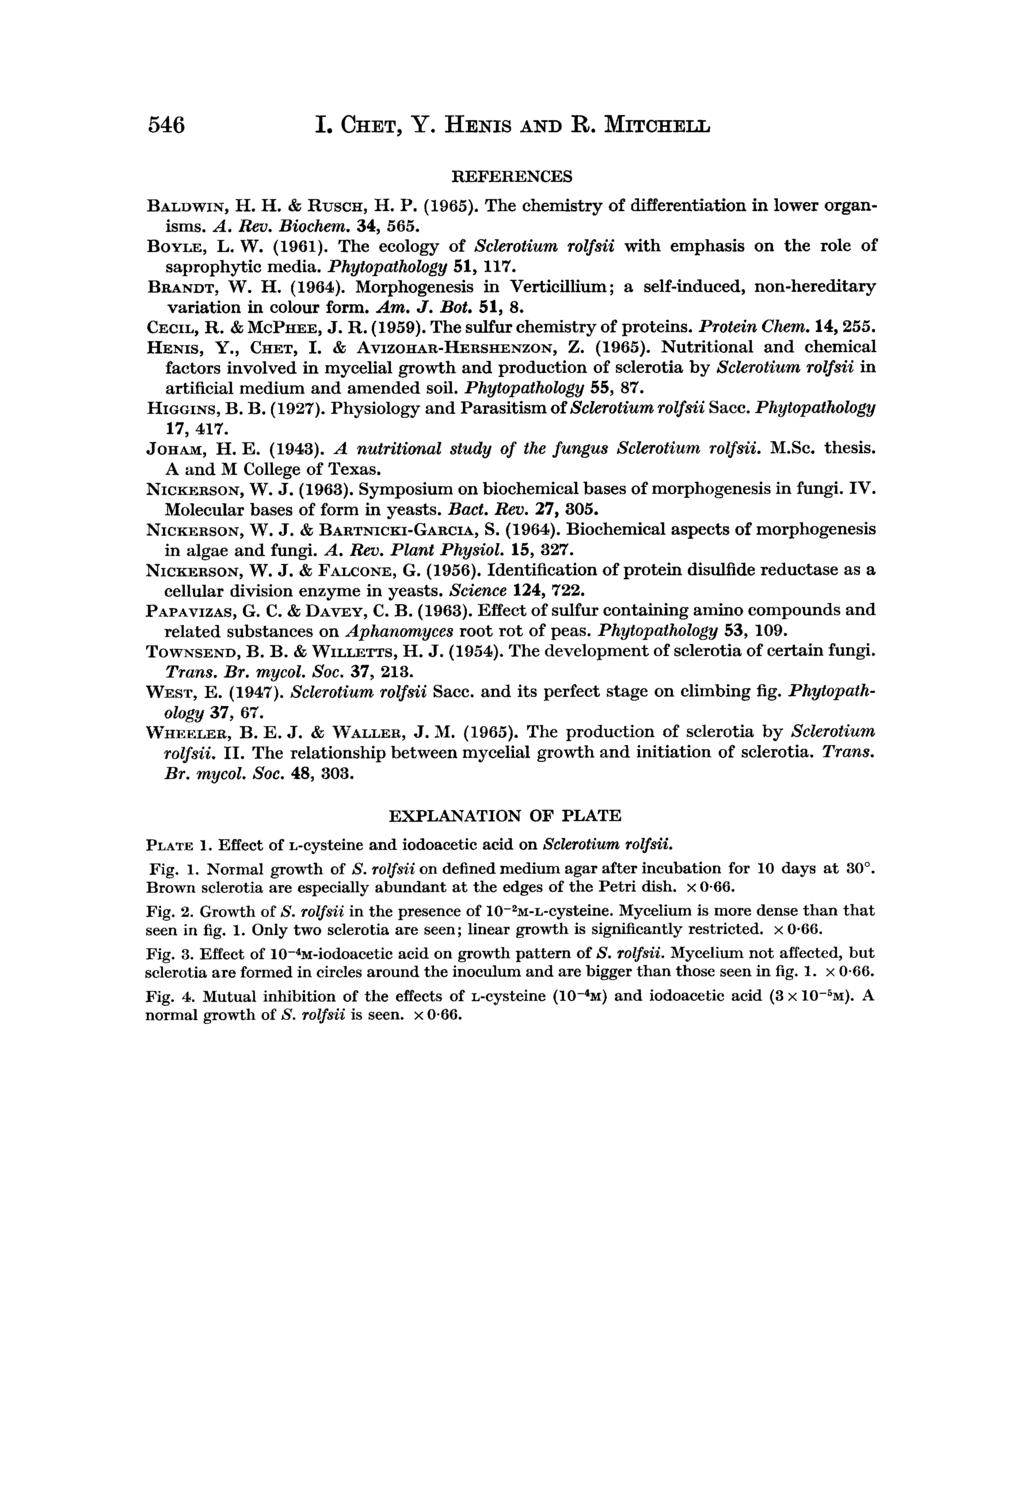 546 I. CHET, Y. HENIS AND R. MITCHELL REFERENCES BALDWIN, H. H. & RUSCH, H. P. (1965). The chemistry of differentiation in lower organisms. A. Rev. Biochem. 34, 565. BOYLE, L. W. (1961).